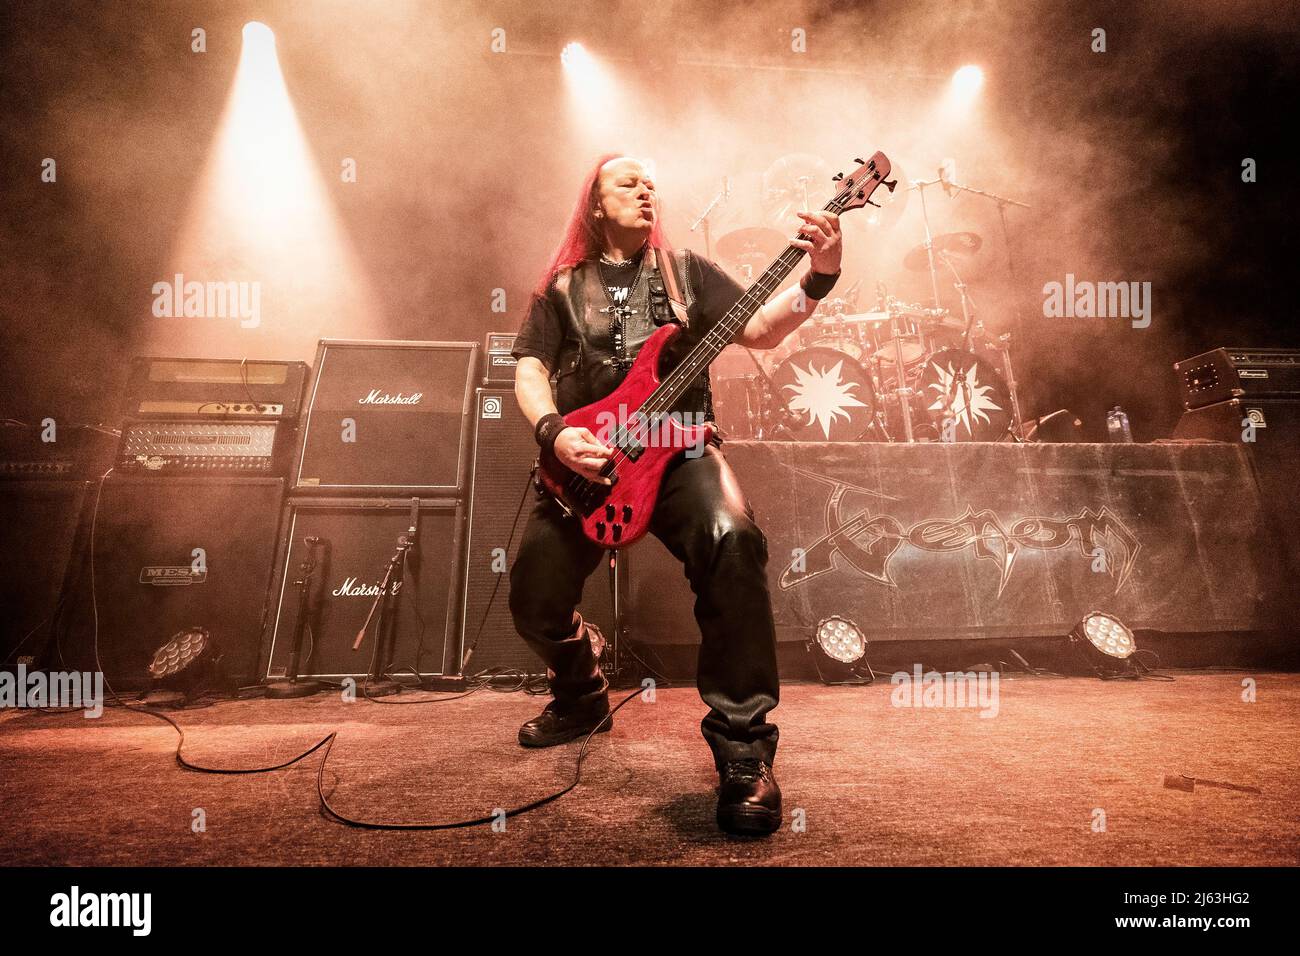 Oslo, Norway. 15th, April 2022. The British heavy metal band Venom performs  a live concert during the Norwegian metal festival Inferno Metal Festival  2022 in Oslo. Here bass player Conrad Lant, also